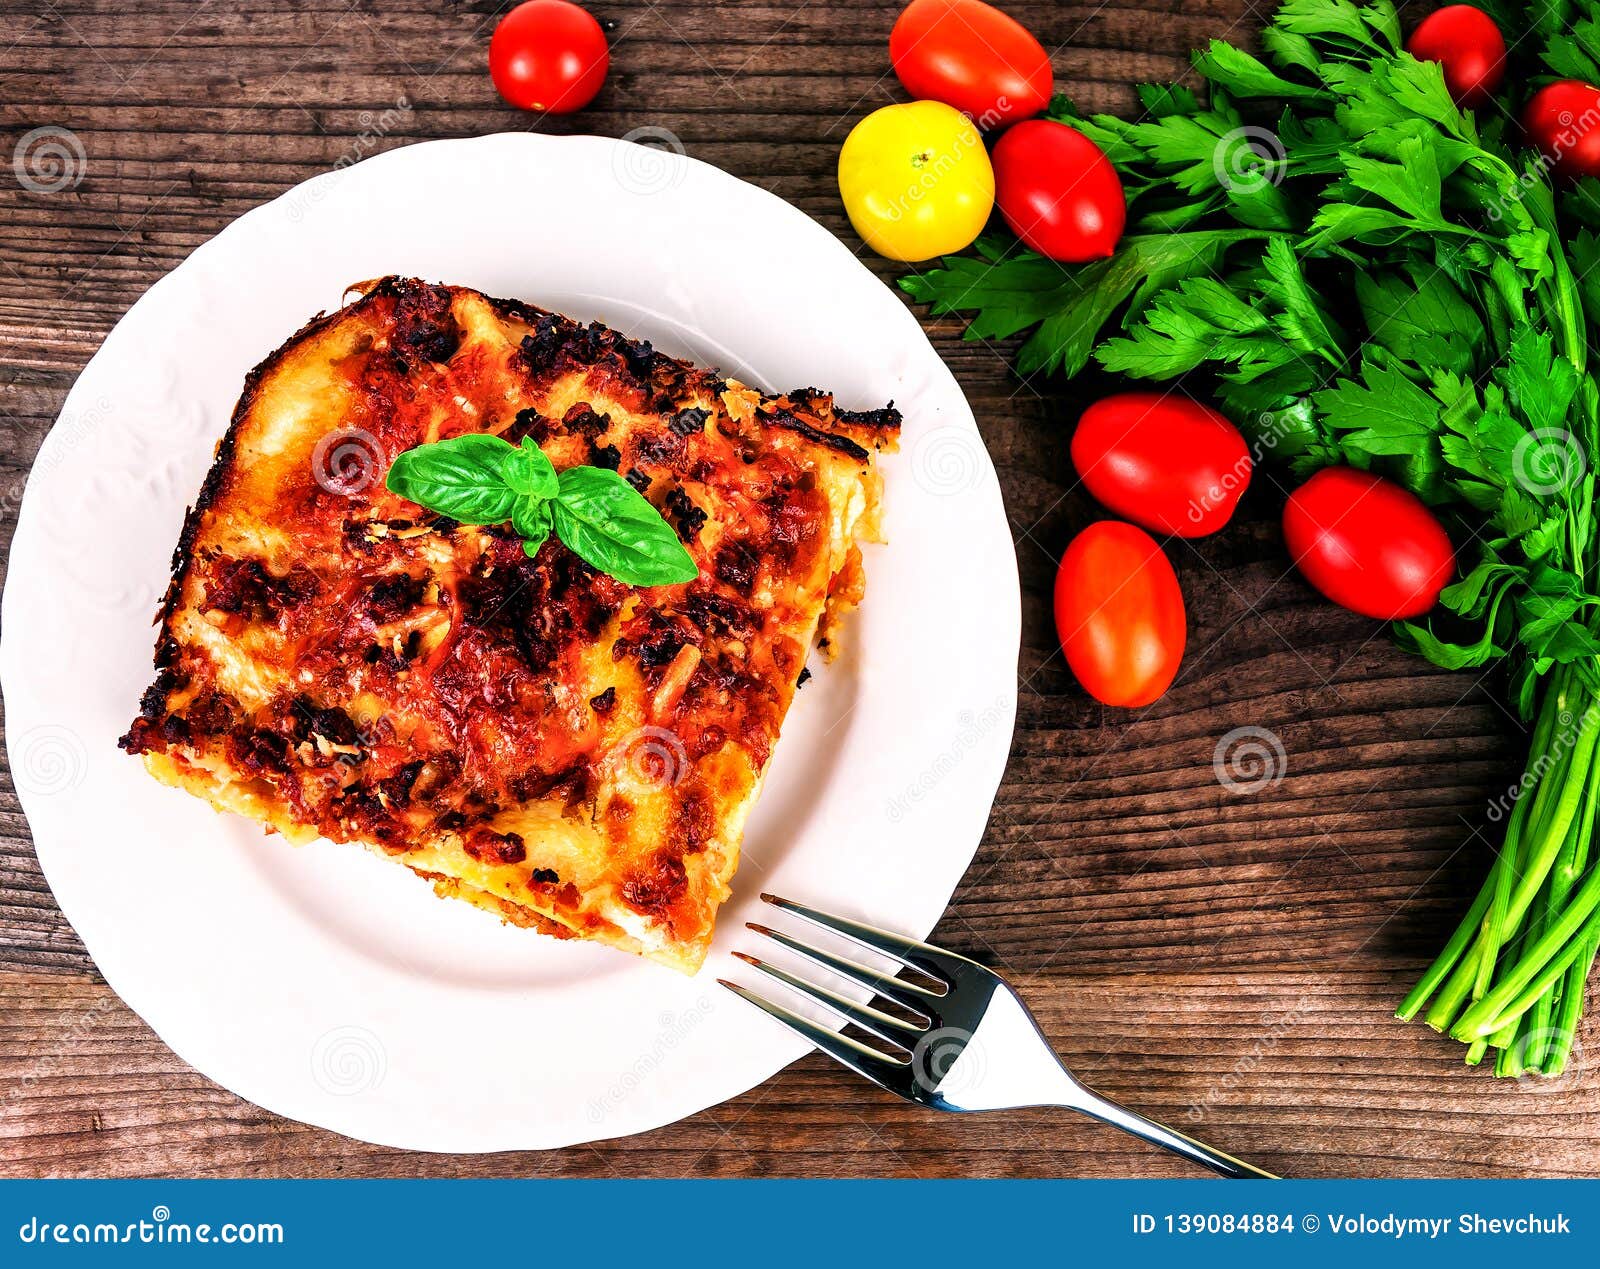 Delicious Lasagna on White Plate Stock Photo - Image of meal, herb ...